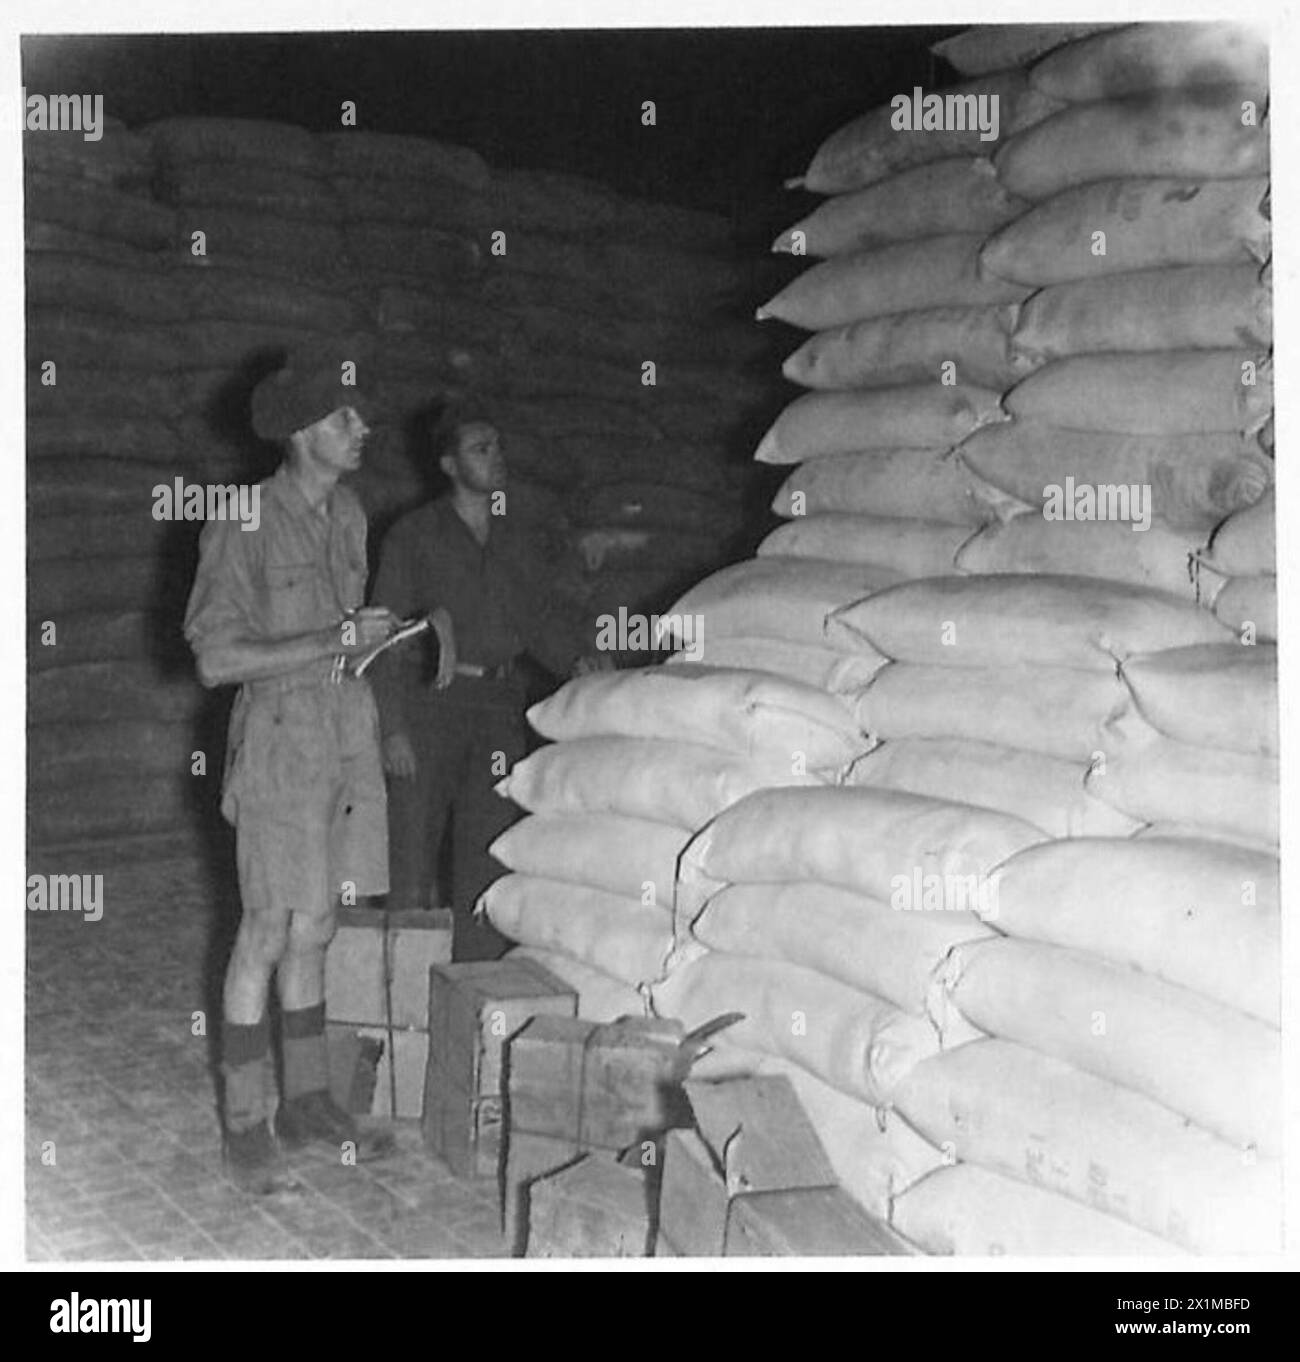 ITALY : THE FEEDING OF ROME - Pte. B. Stamford (left) of Beacon House, Clifton Maltby, Rotherhan, and Pfc. L. Tradewell of Boston, Mass., USA checking up the flour in the Central Railway Station, Rome, British Army Stock Photo